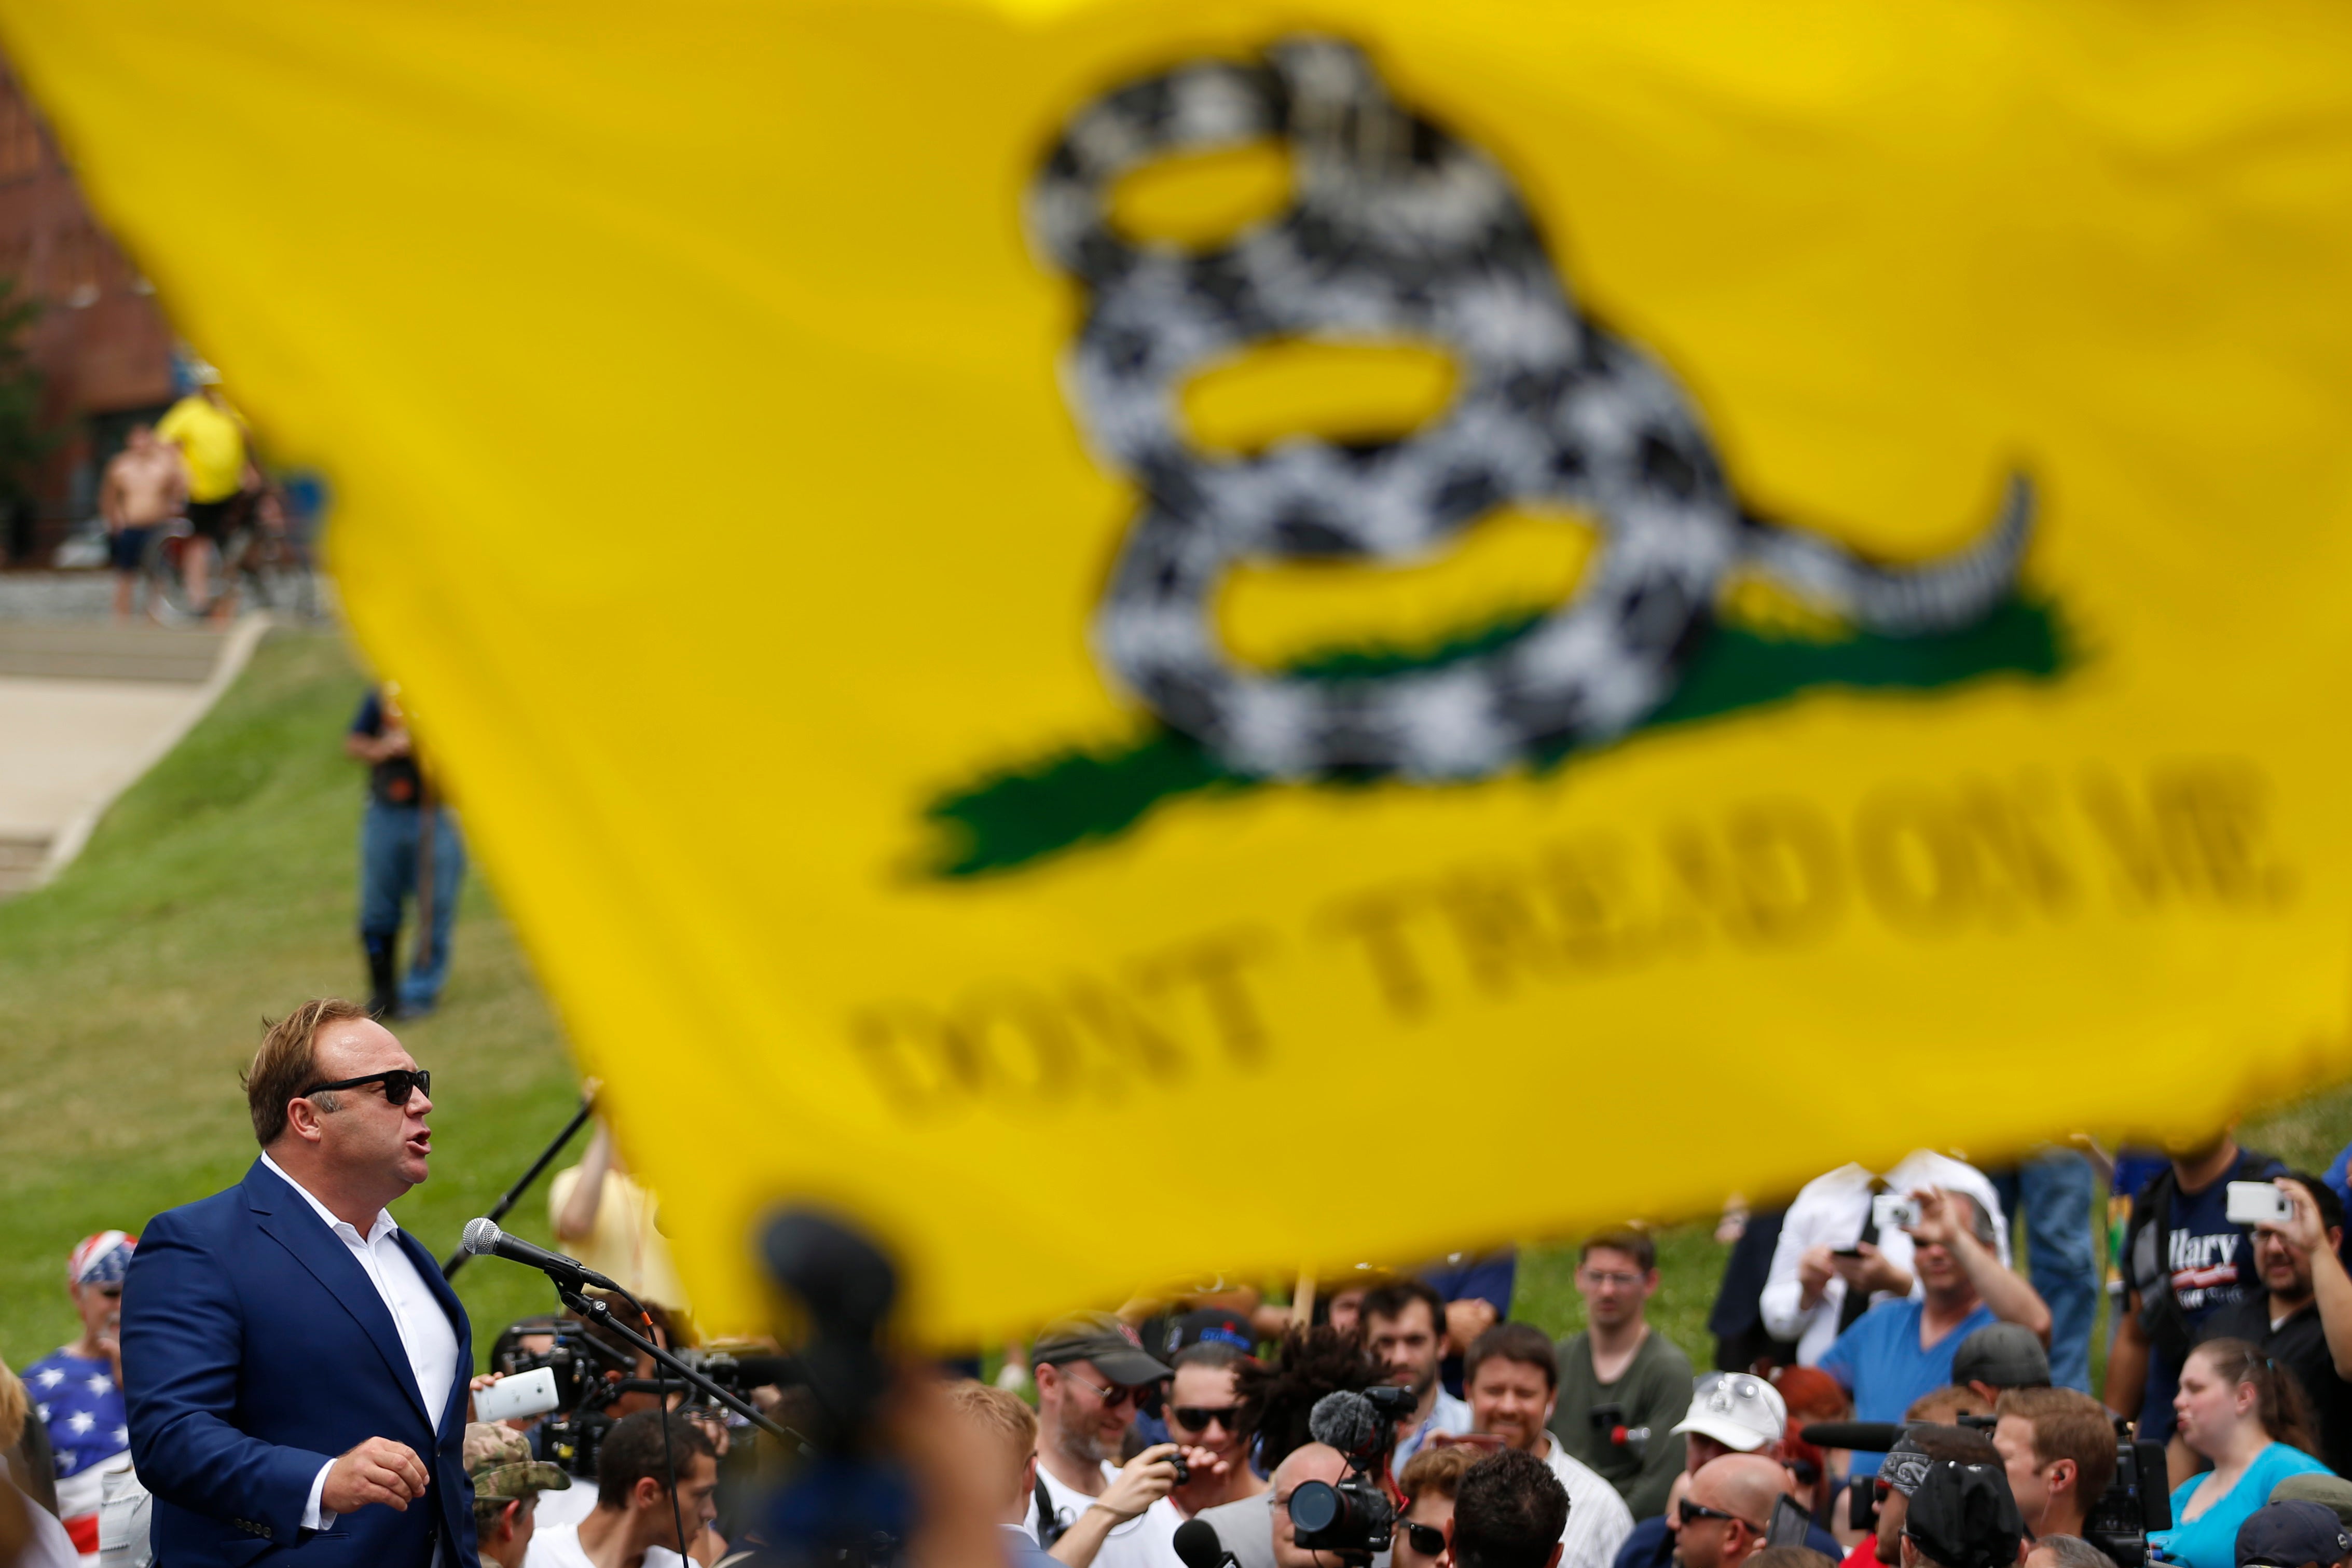 Alex Jones speaks at a public event behind a "Don't Tread on Me" flag.